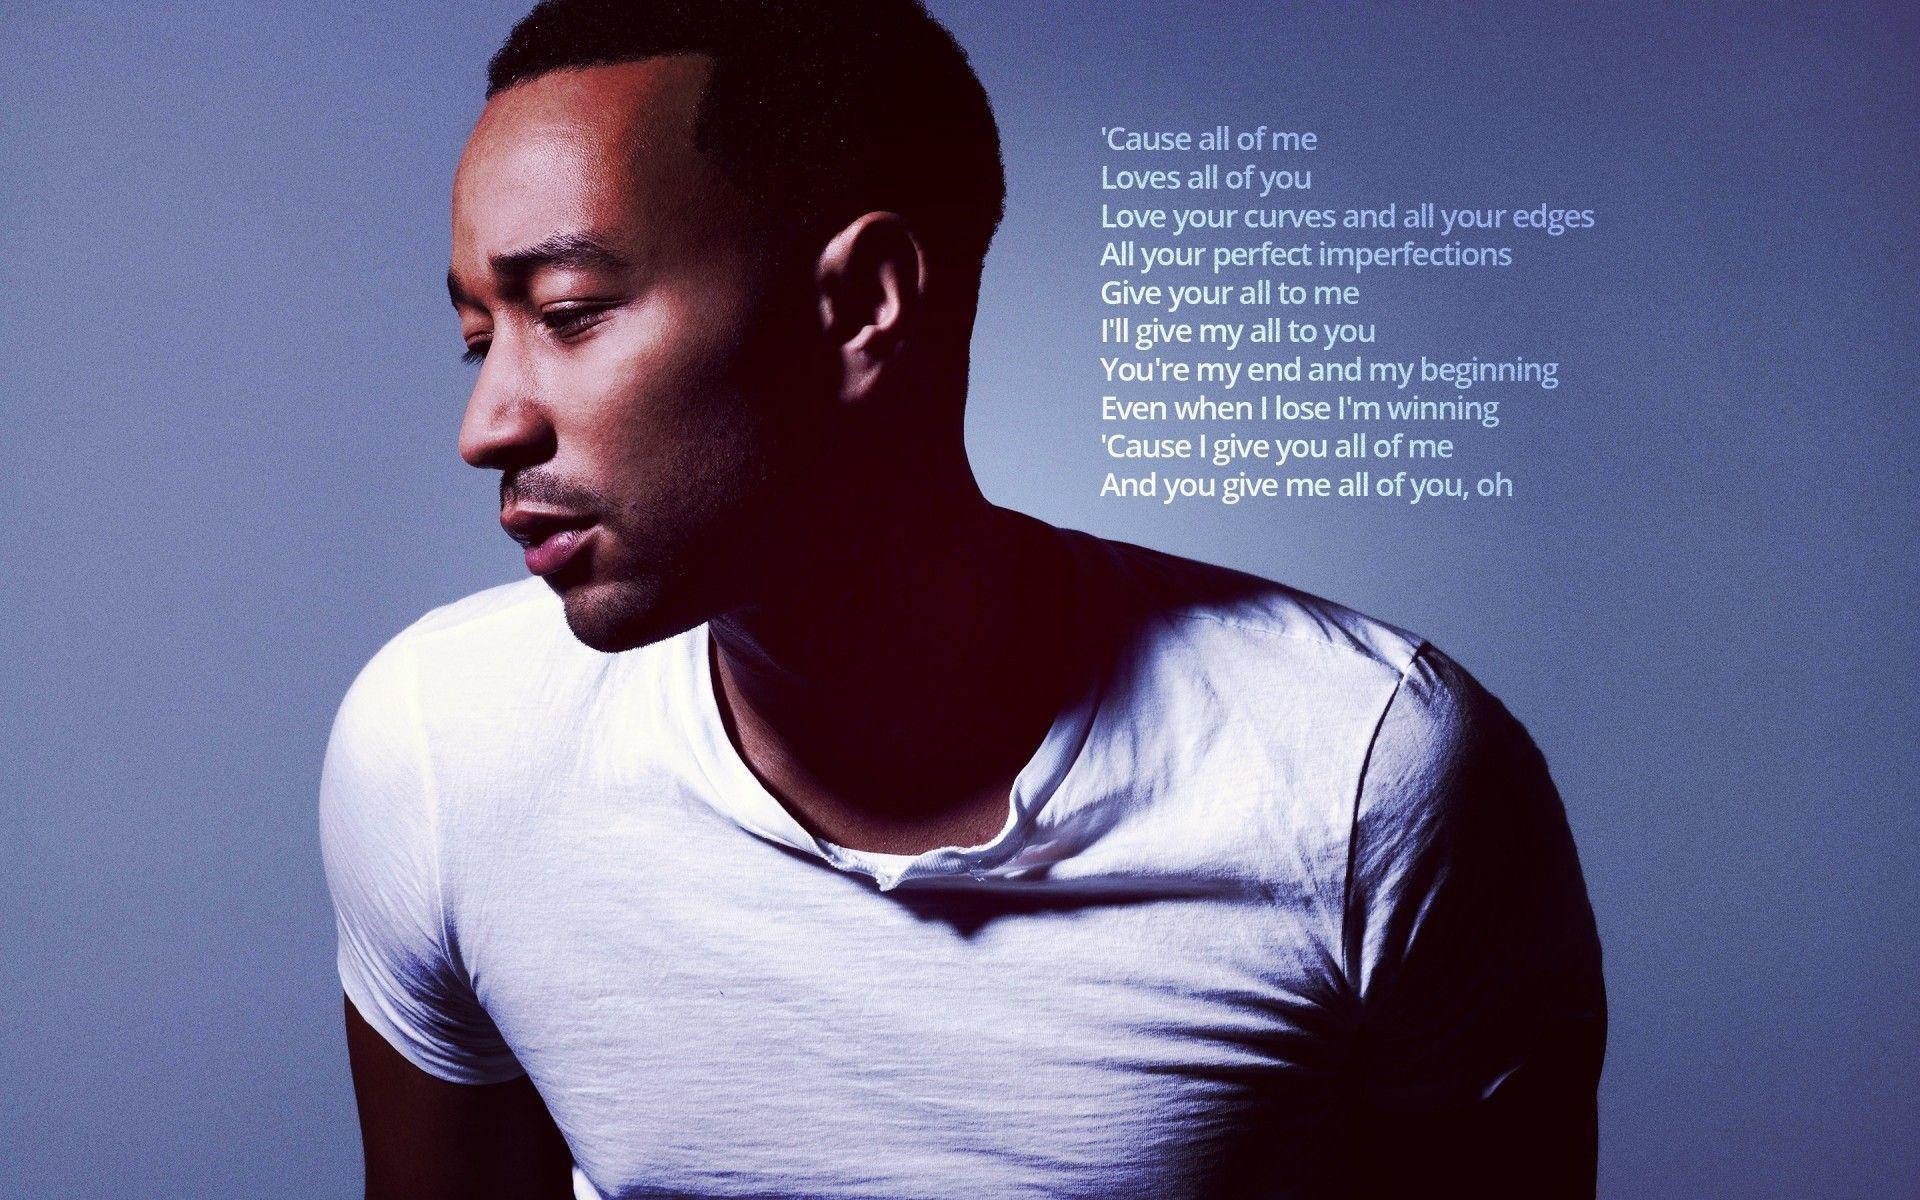 John Legend All of Me. Android wallpaper for free